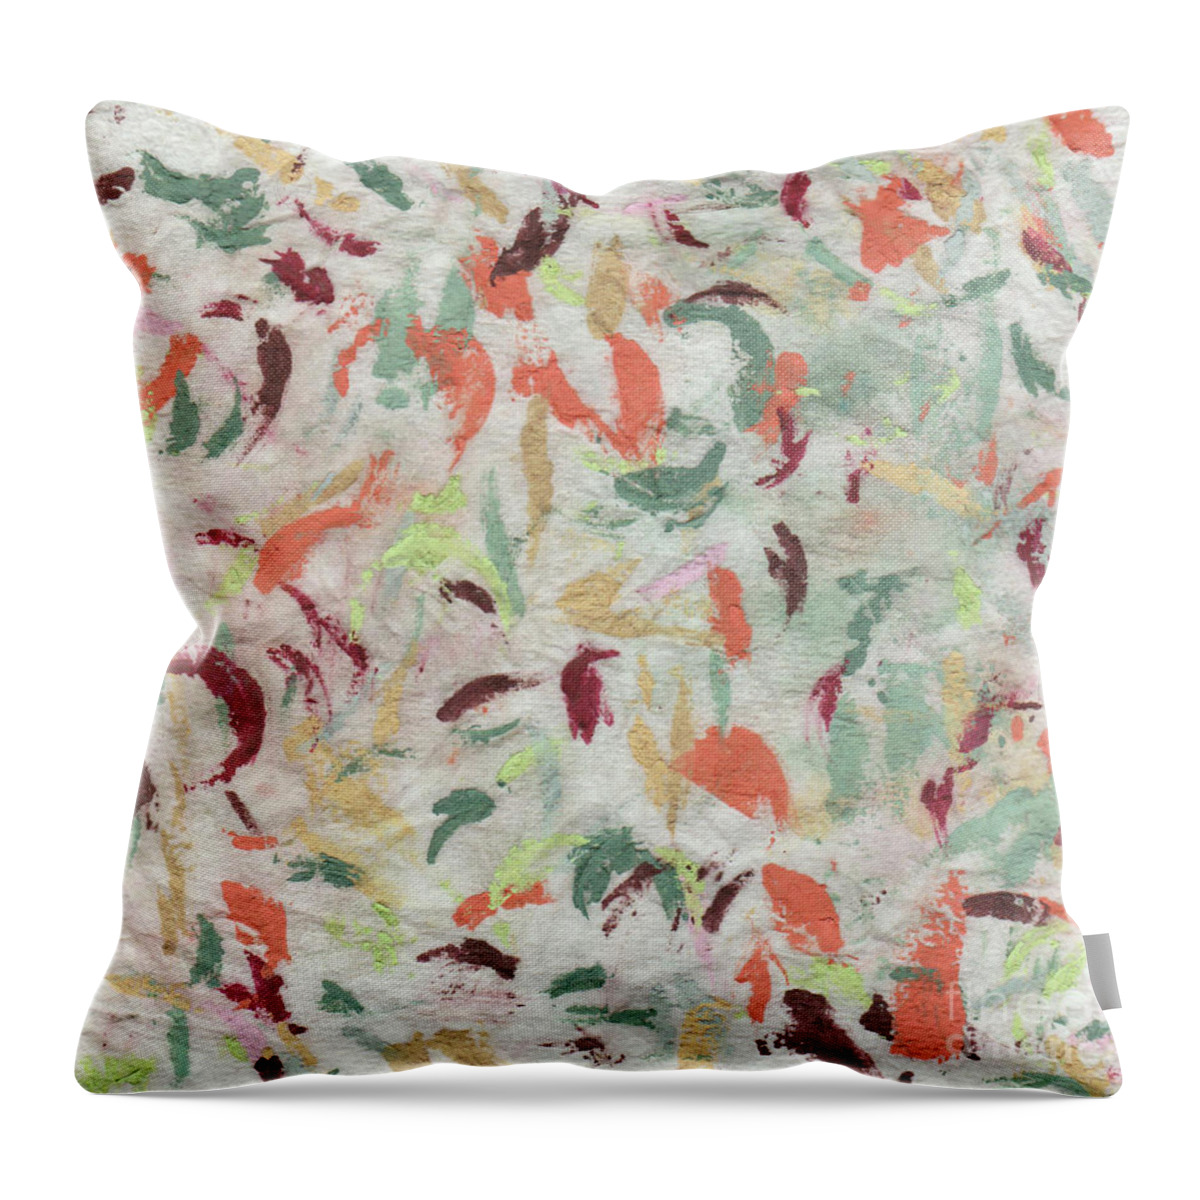 Koi Throw Pillow featuring the painting Koi In Pond by Doug Miller